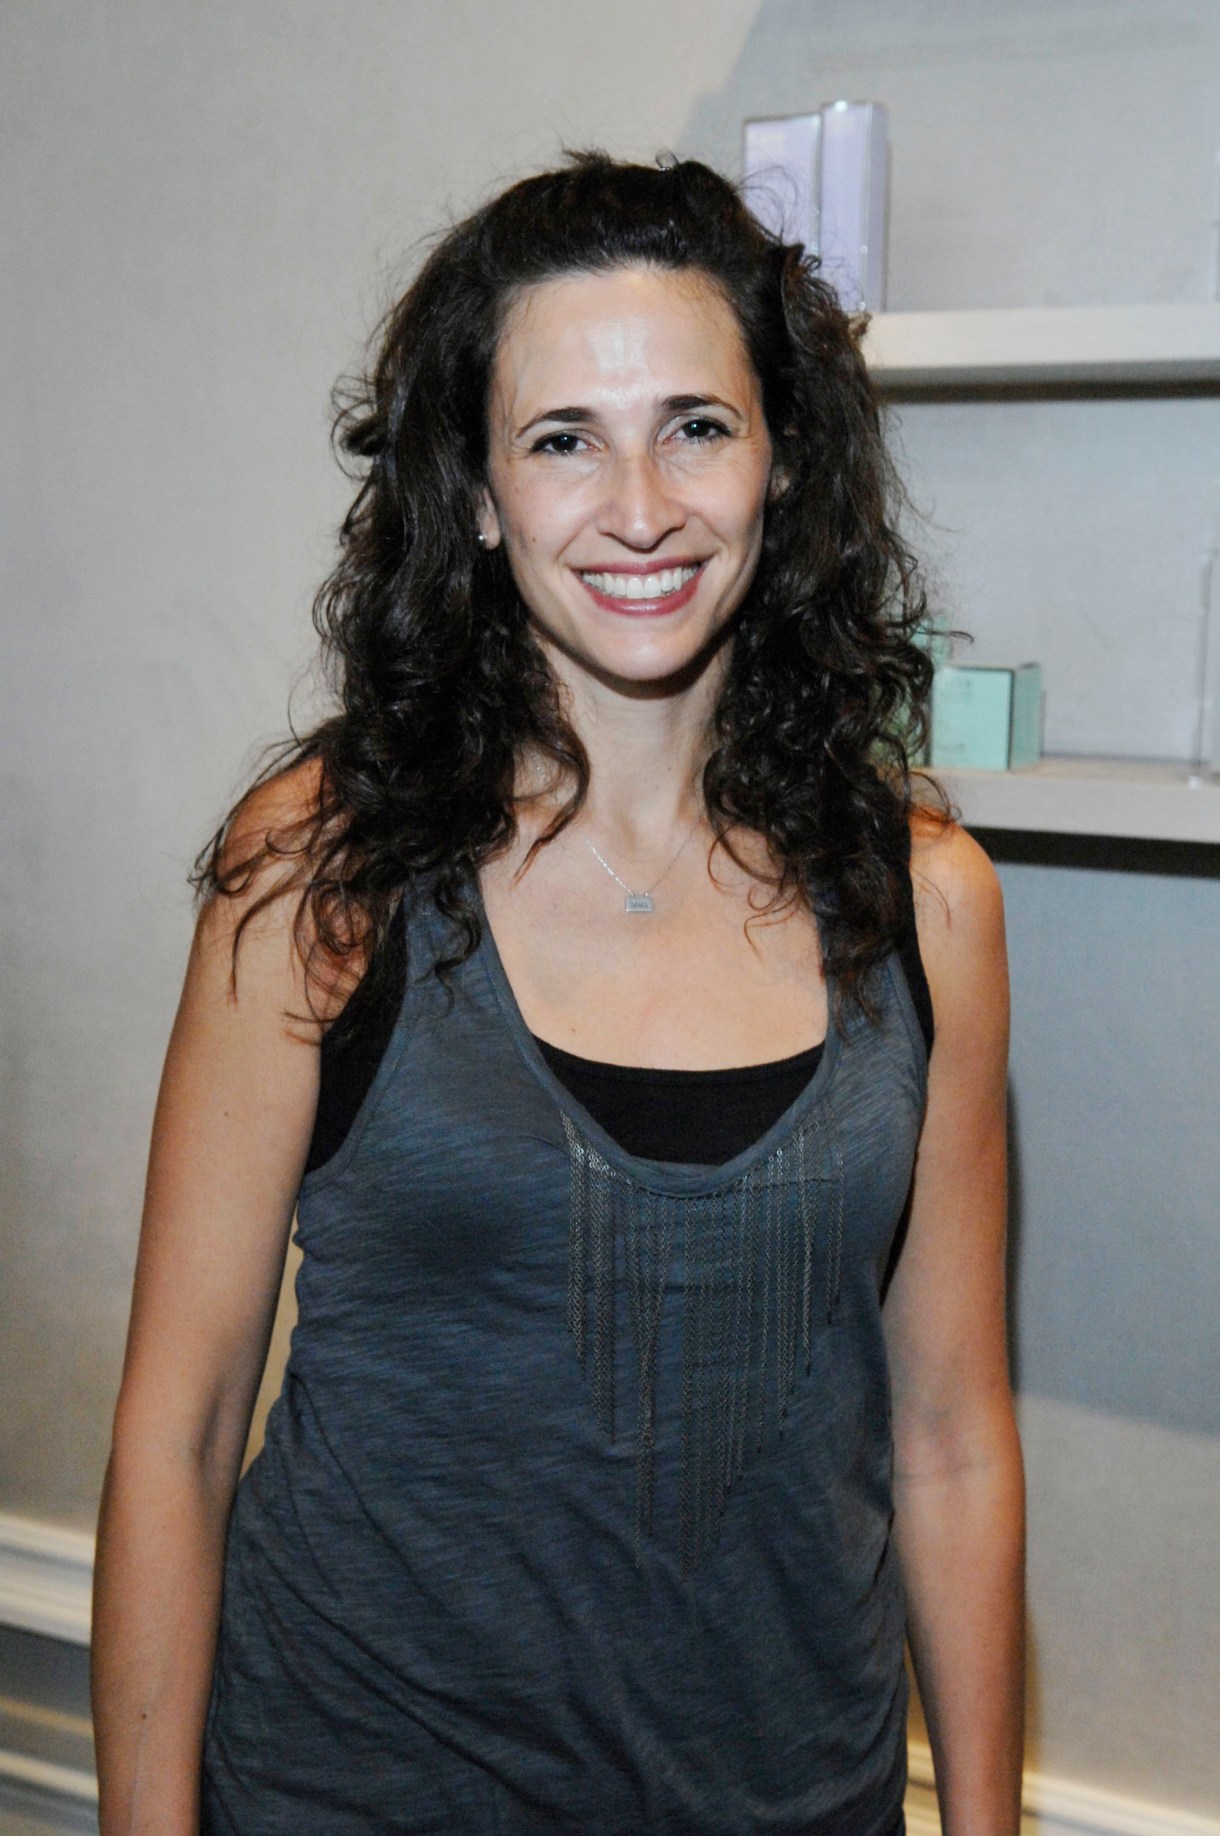 LOS ANGELES, CA - SEPTEMBER 18: Michaela Watkins attends the Kate Somerville Emmy Gifting Suite Event - Day 2 at Kate Somerville on September 18, 2009 in Los Angeles, California.